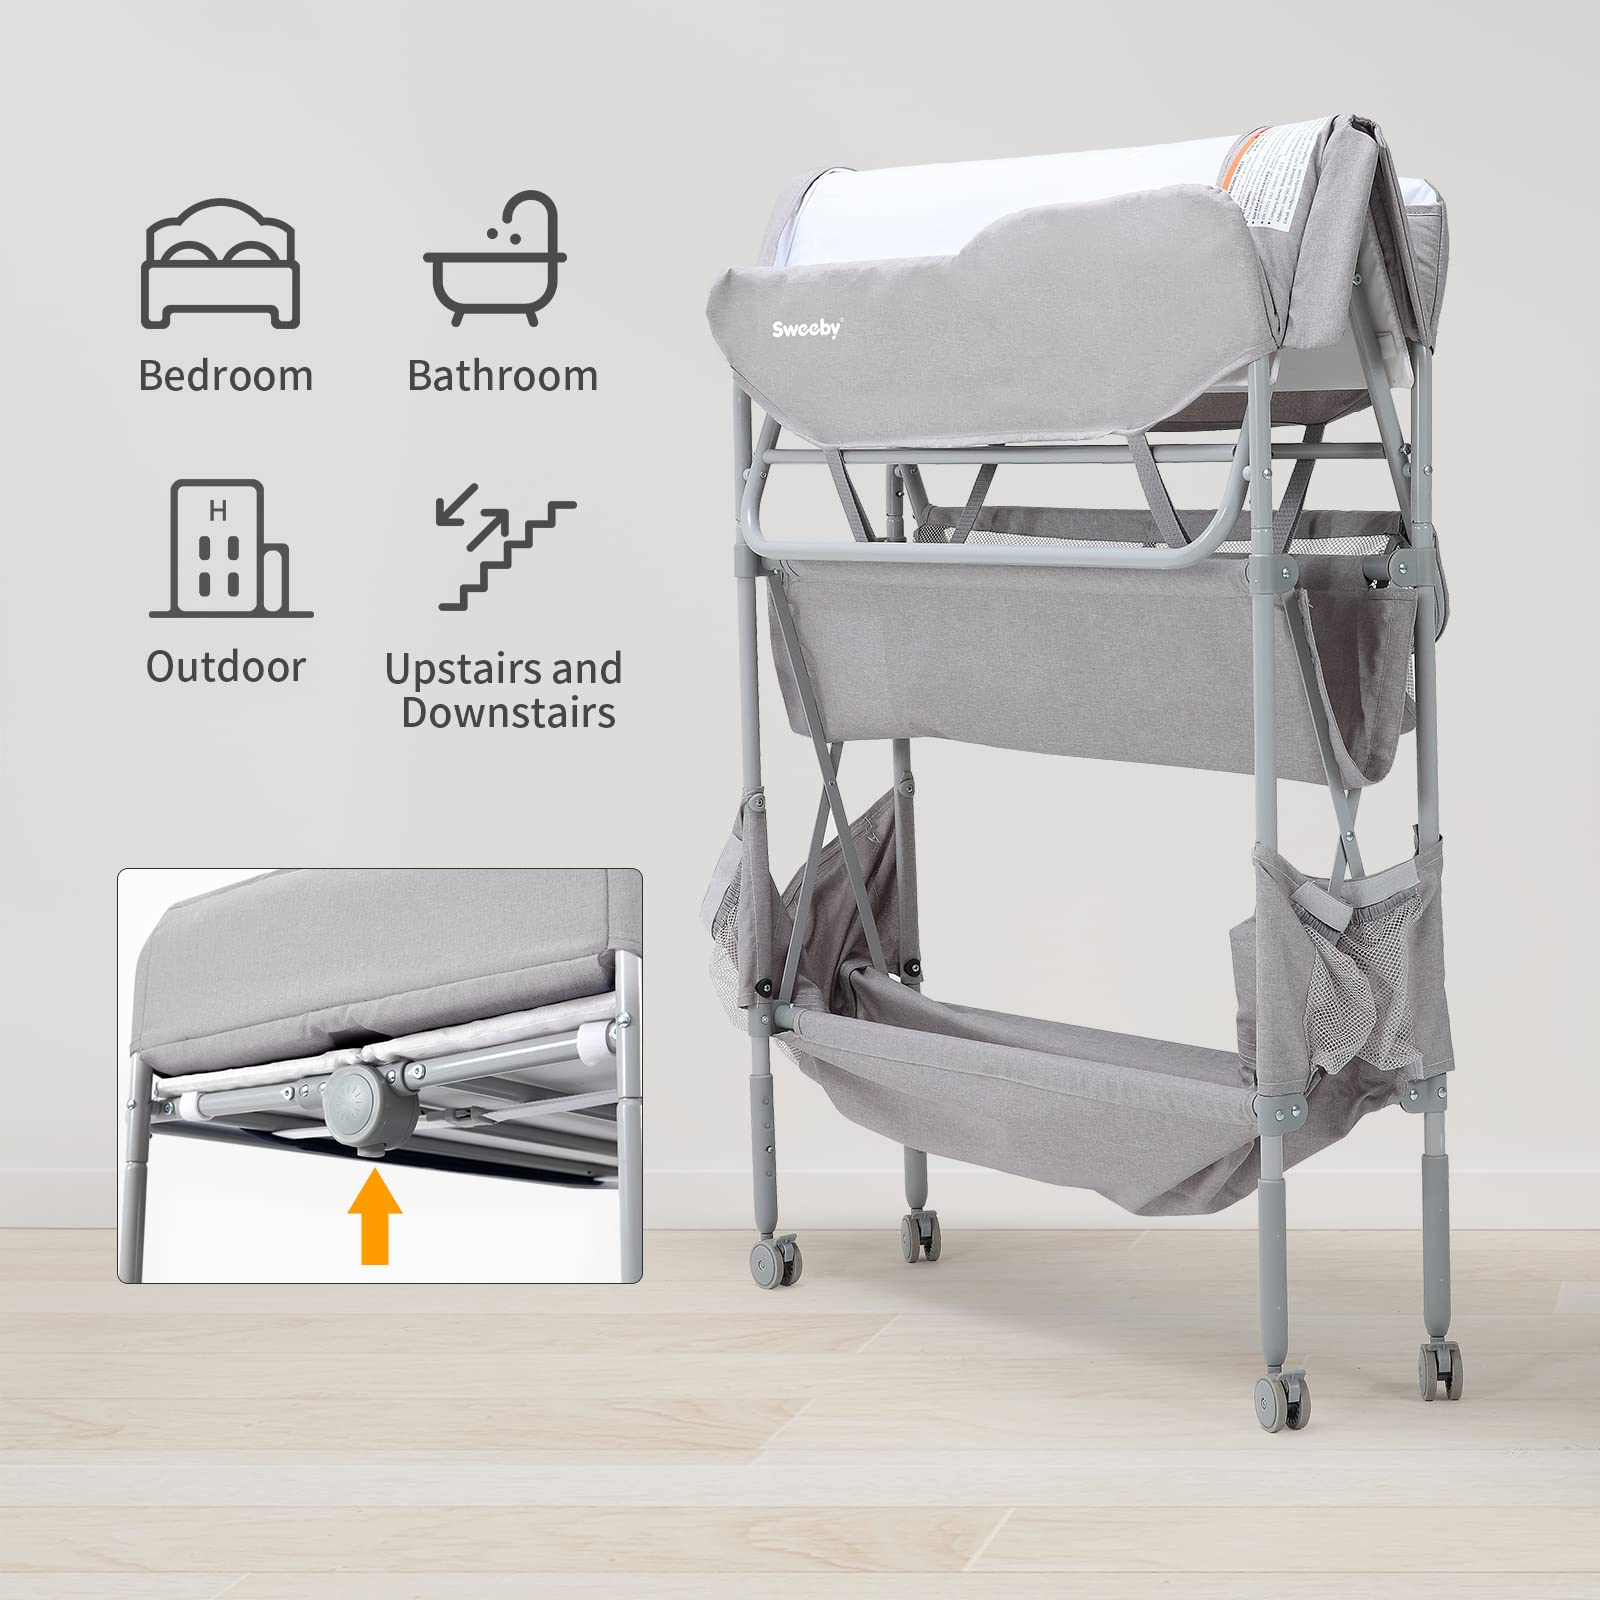 Sweeby Portable Baby Changing Table, Foldable Changing Table Dresser Changing Station for Infant, Waterproof Diaper Changing Table Pad Topper, Mobile Nursery Organizer for Newborn Essentials (Grey)